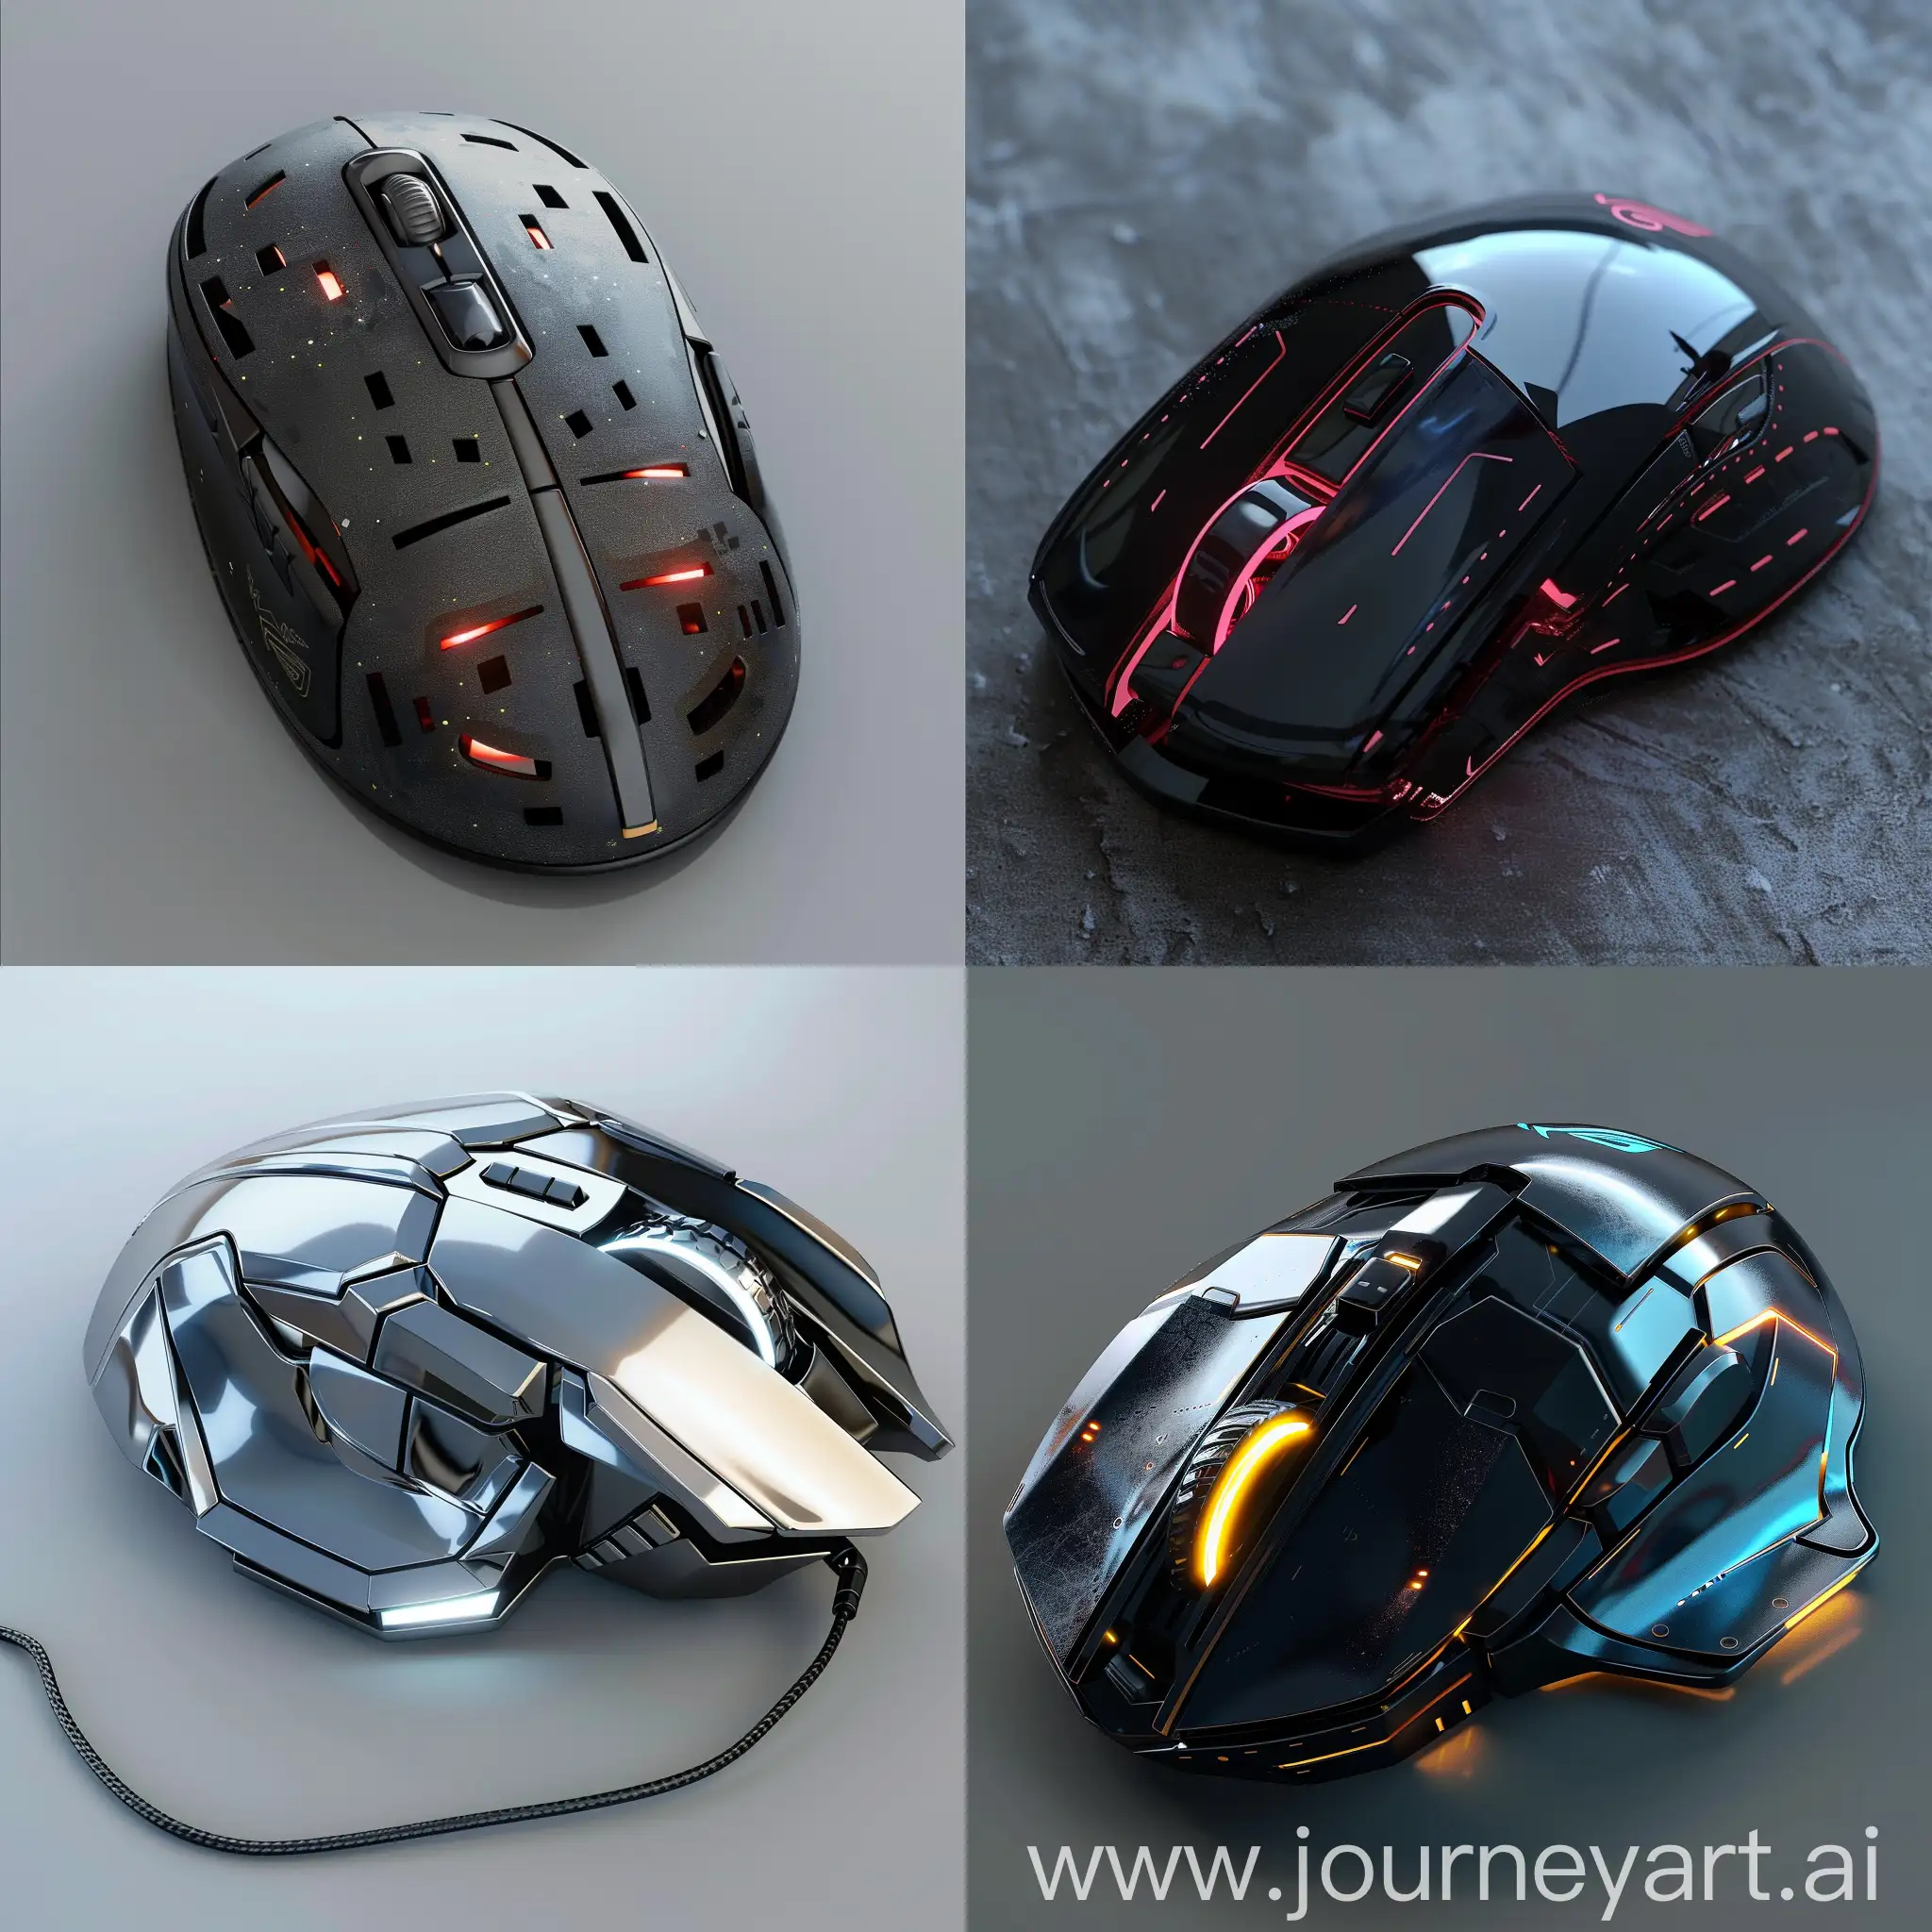 10000$ gaming mouse, photorealistic